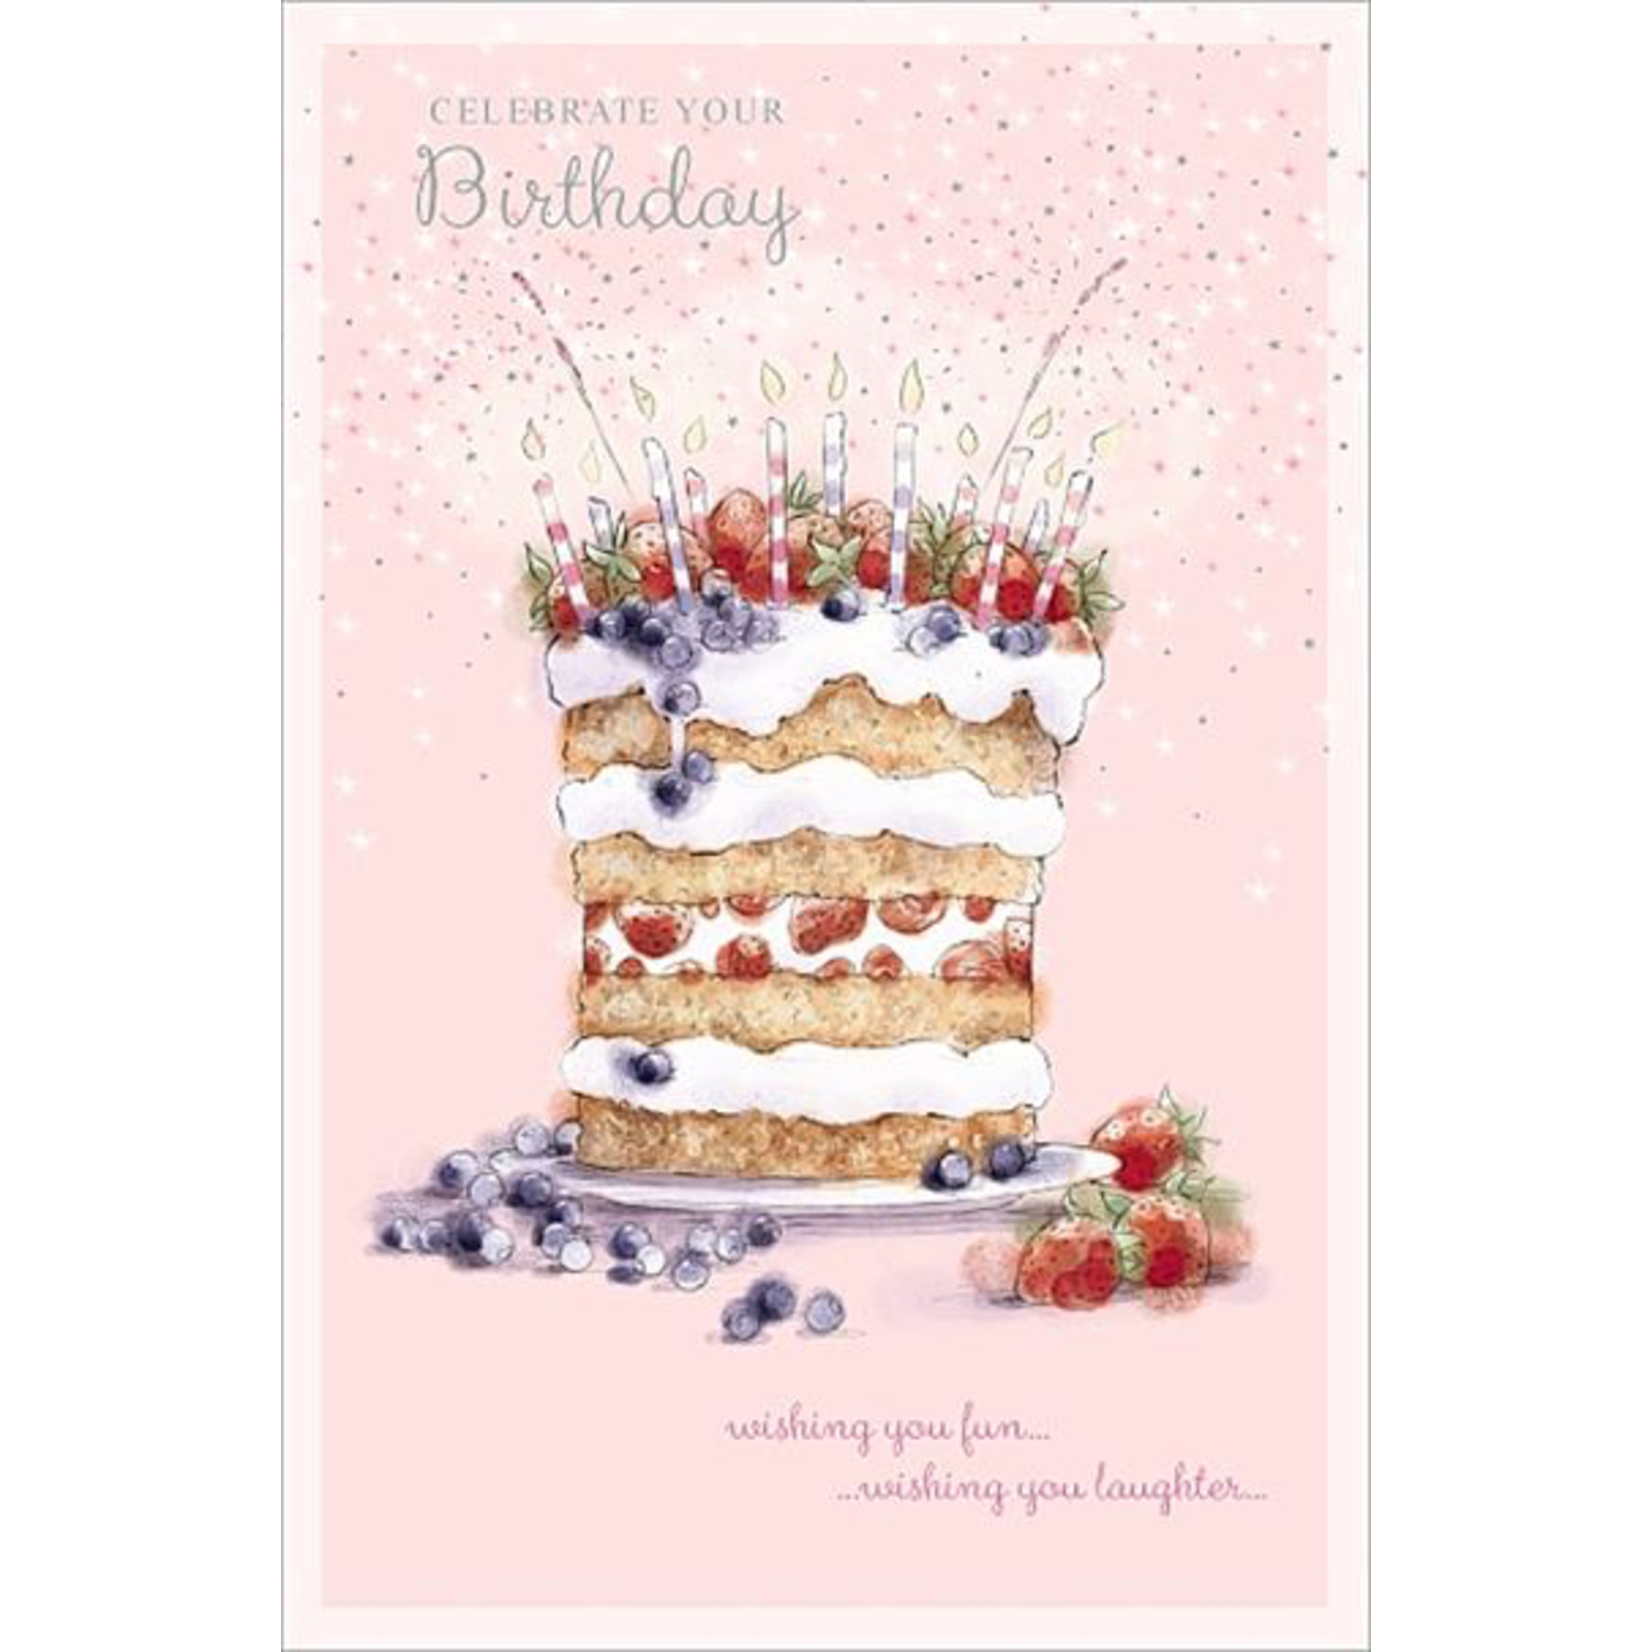 Happy birthday cake card with name and photo edit